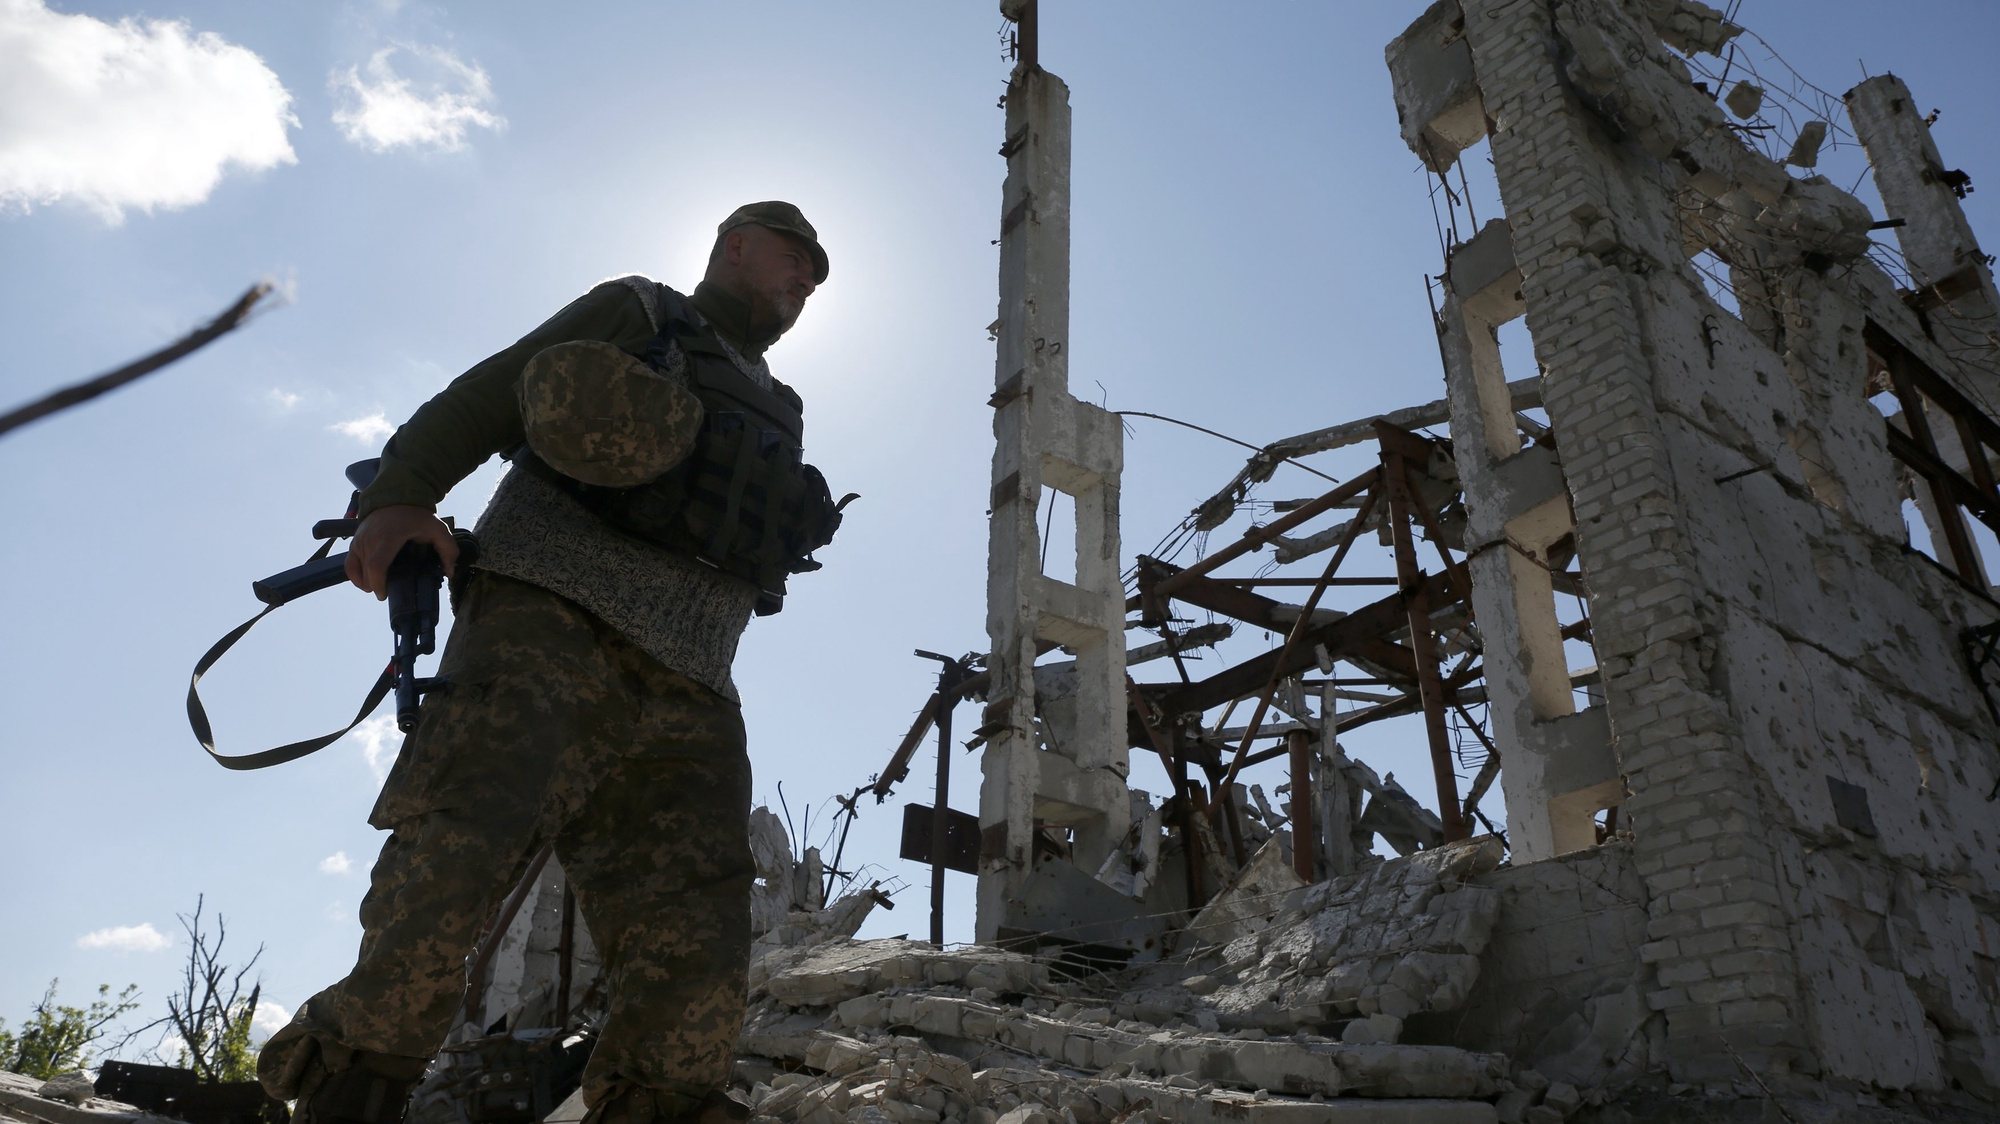 epa05957672 An Ukrainian soldier walks next to a damaged building of the Butovka Coal Mine, after shelling in Donetsk area, Ukraine, 11 May 2017. The number of people wishing to get a biometric passport of a citizen of Ukraine has increased sharply on the territories of the self-proclaimed Donetsk and Luhansk Peoples Republics controlled by pro-Russia rebels, as local media report. The Council of the European Union adopted on 11 May 2017 a regulation on visa liberalization for Ukrainian citizens travelling to the EU for a period of stay of 90 days in any 180-day period.  EPA/VALERI KVIT